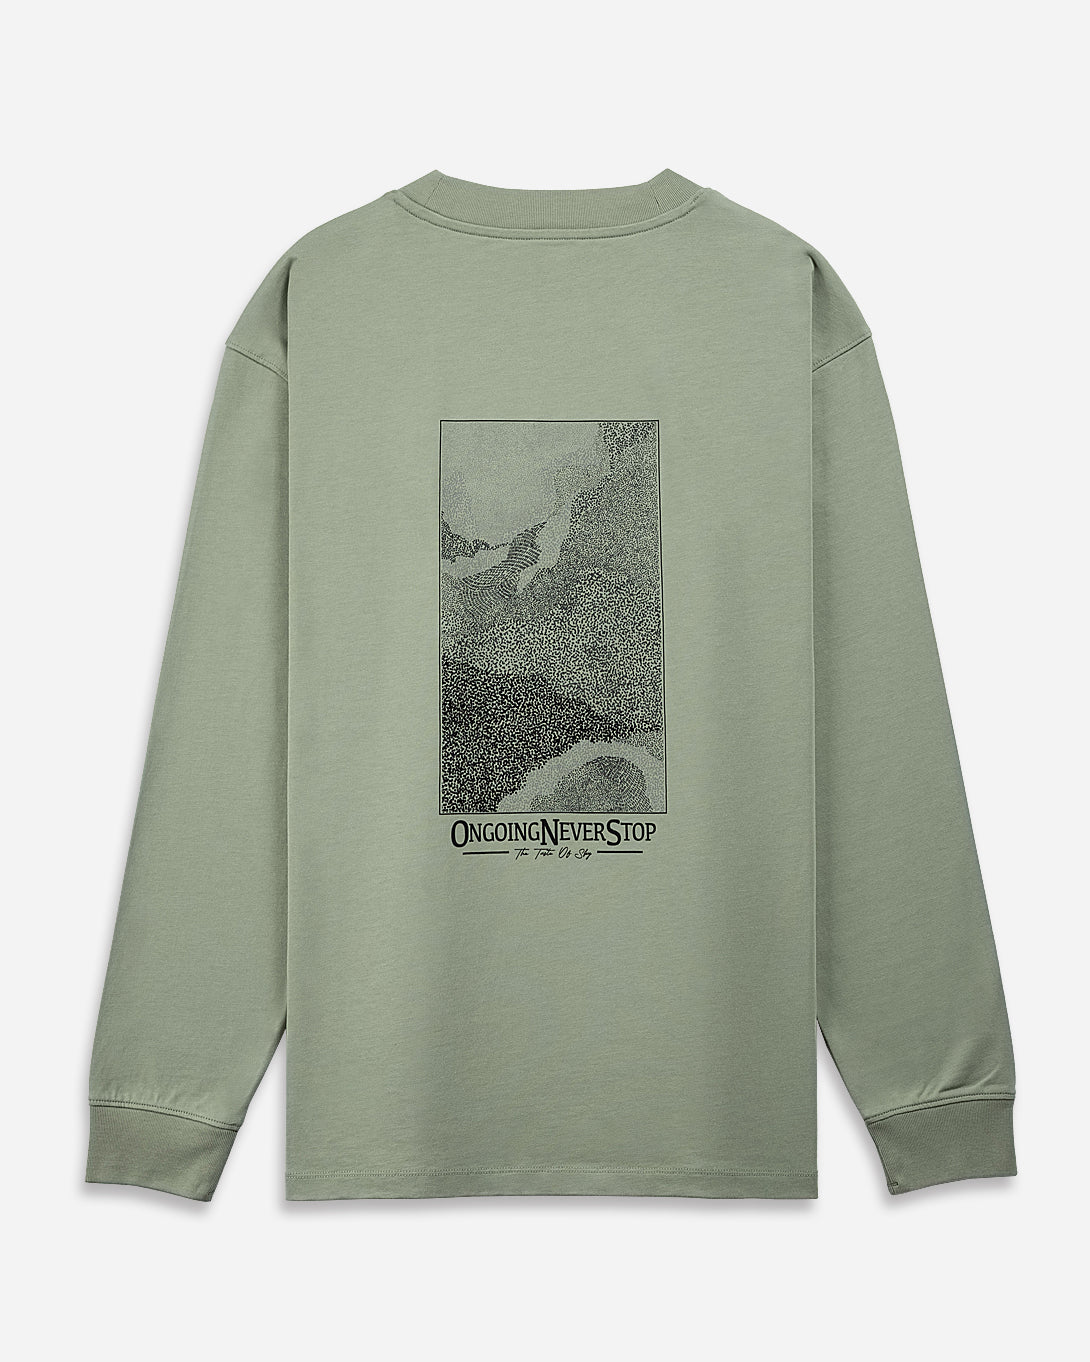 Seagrass Long Sleeve Mens Graphic Tee